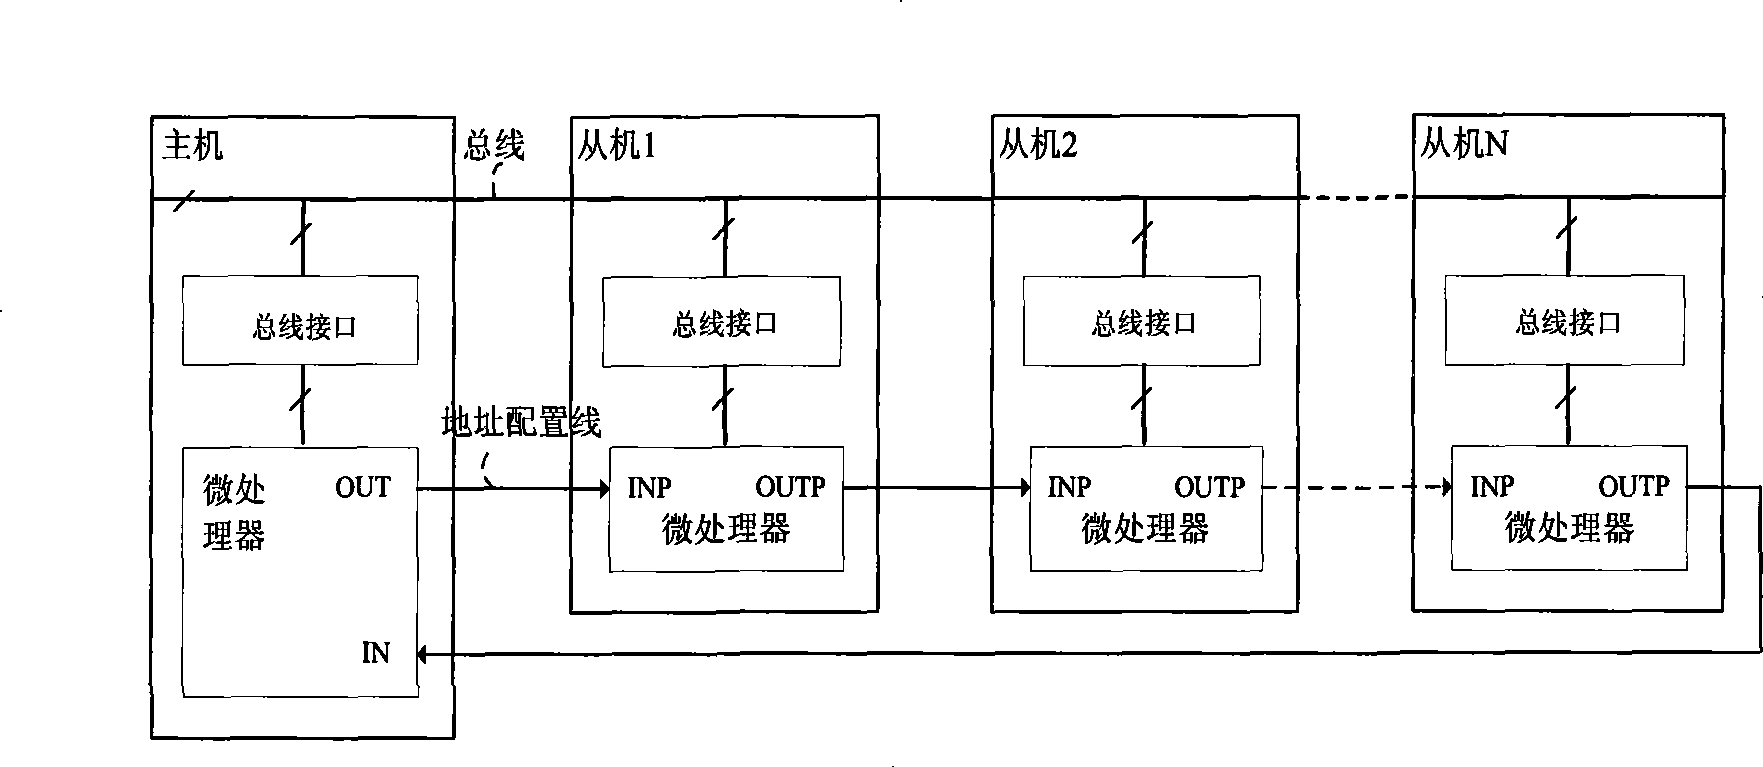 Method for dynamically configuring address and system thereof